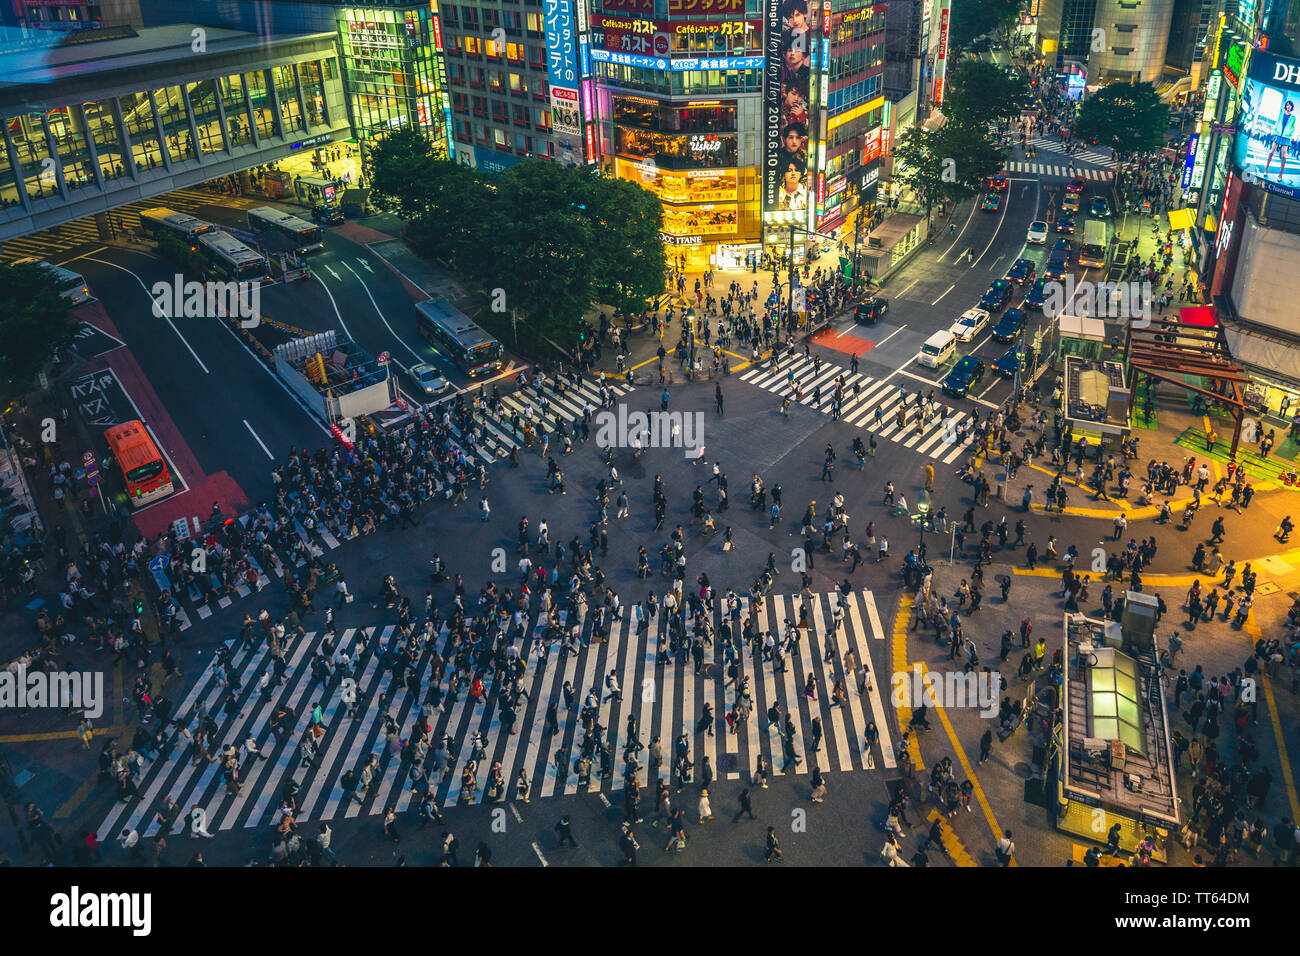 Tokyo, Japan - June 12, 2019: Shibuya Crossing, a world famous and iconic intersection in Shibuya, Tokyo. Hundreds of people from all directions at on Stock Photo